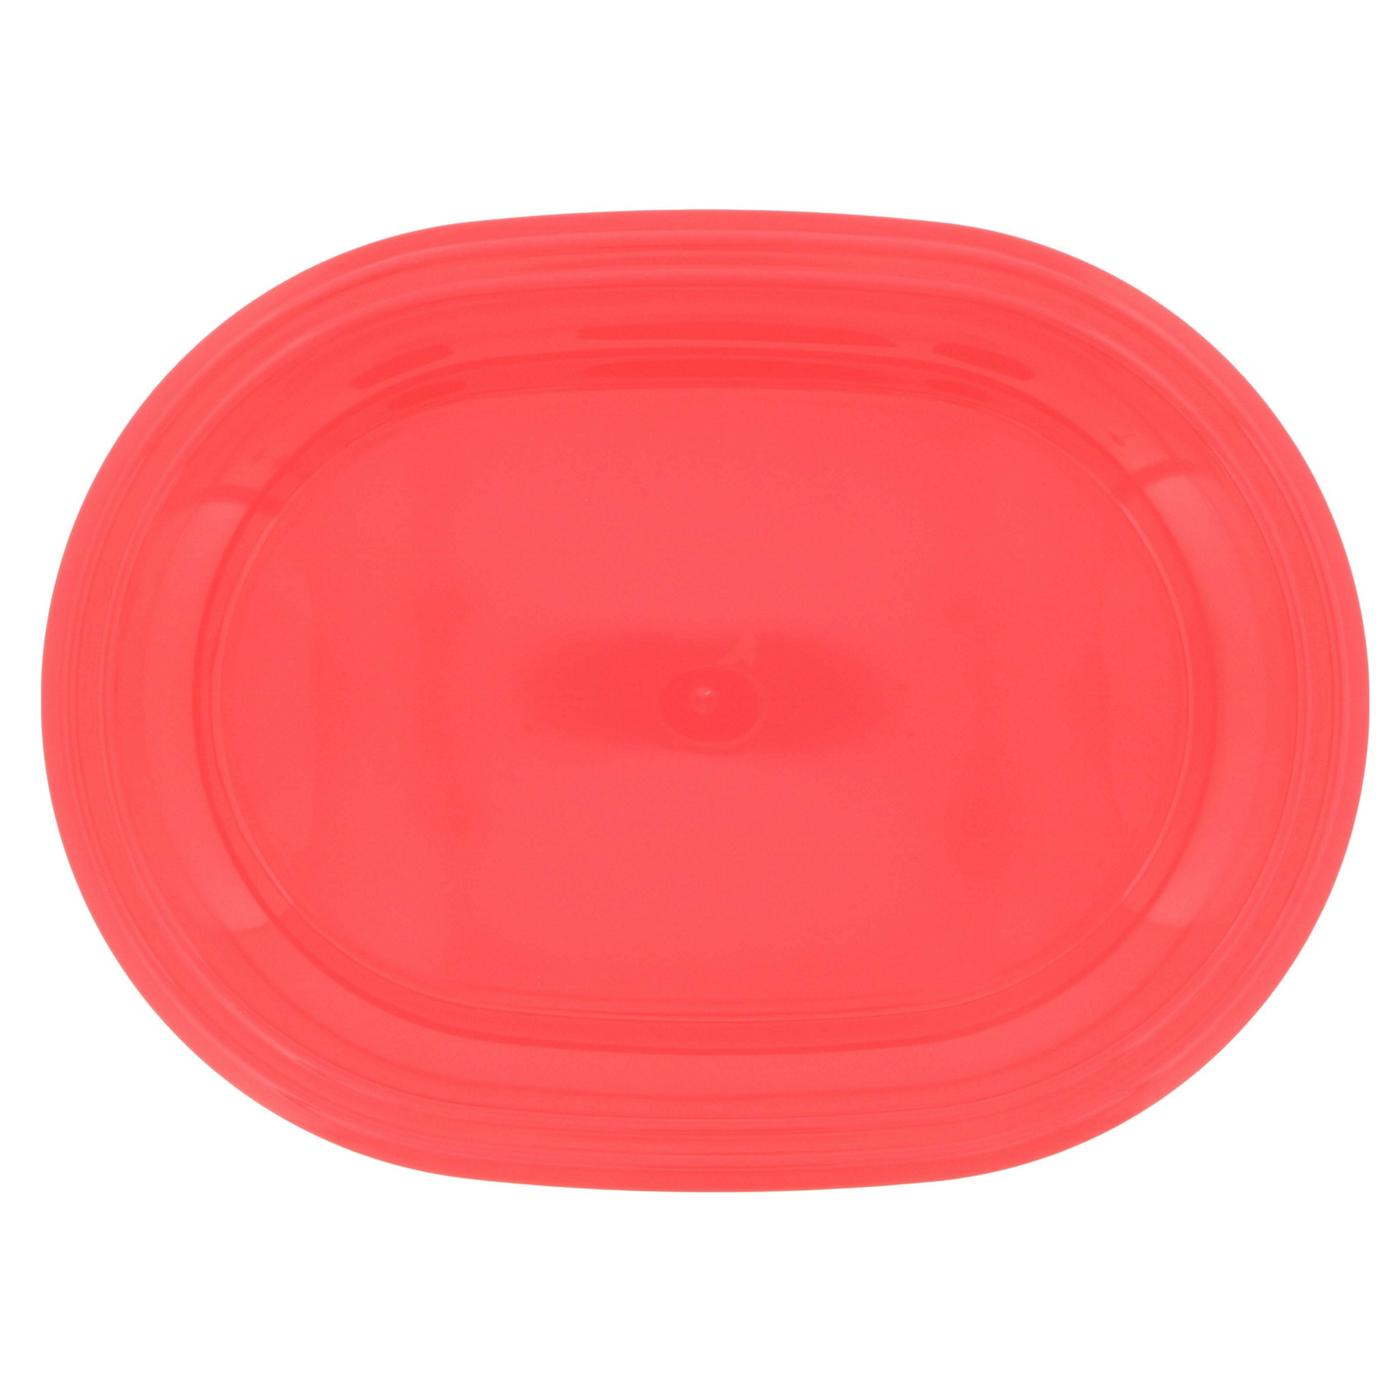 Dining Style Summer Tray; image 1 of 2